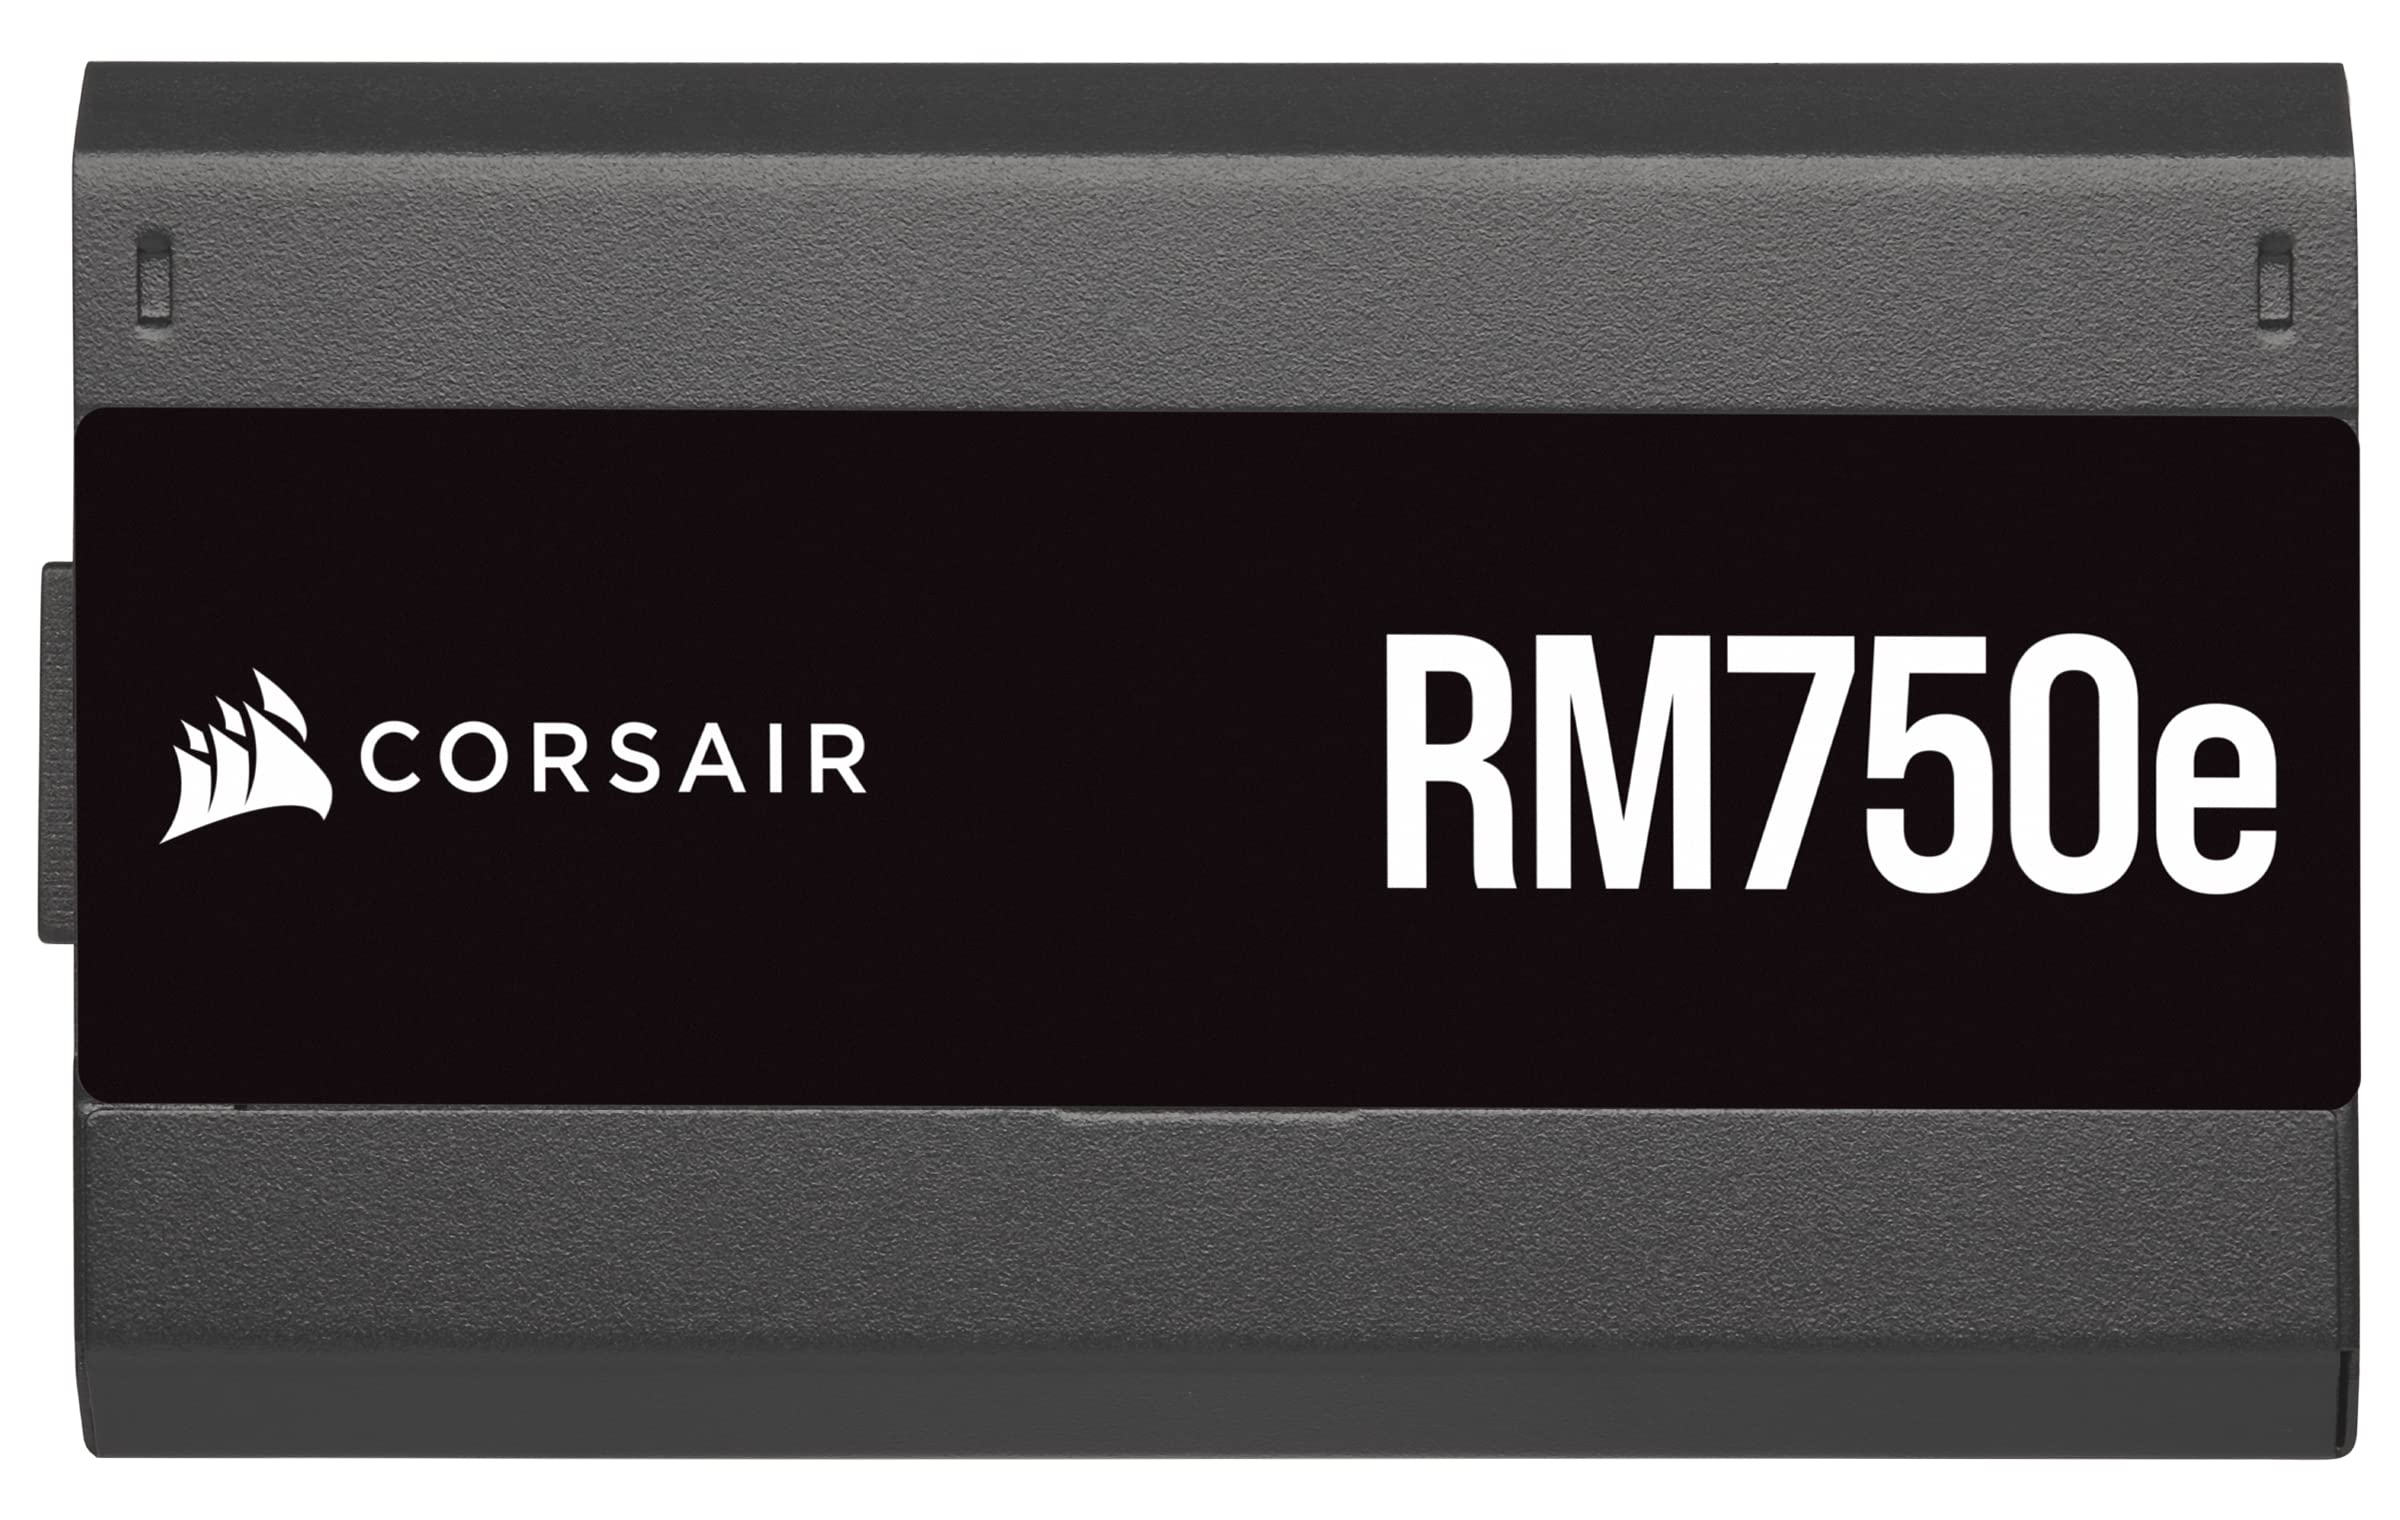 Corsair RM750e Fully Modular Low-Noise ATX Power Supply - Dual EPS12V Connectors - 105°C-Rated Capacitors - 80 Plus Gold Efficiency - Modern Standby Support - Black